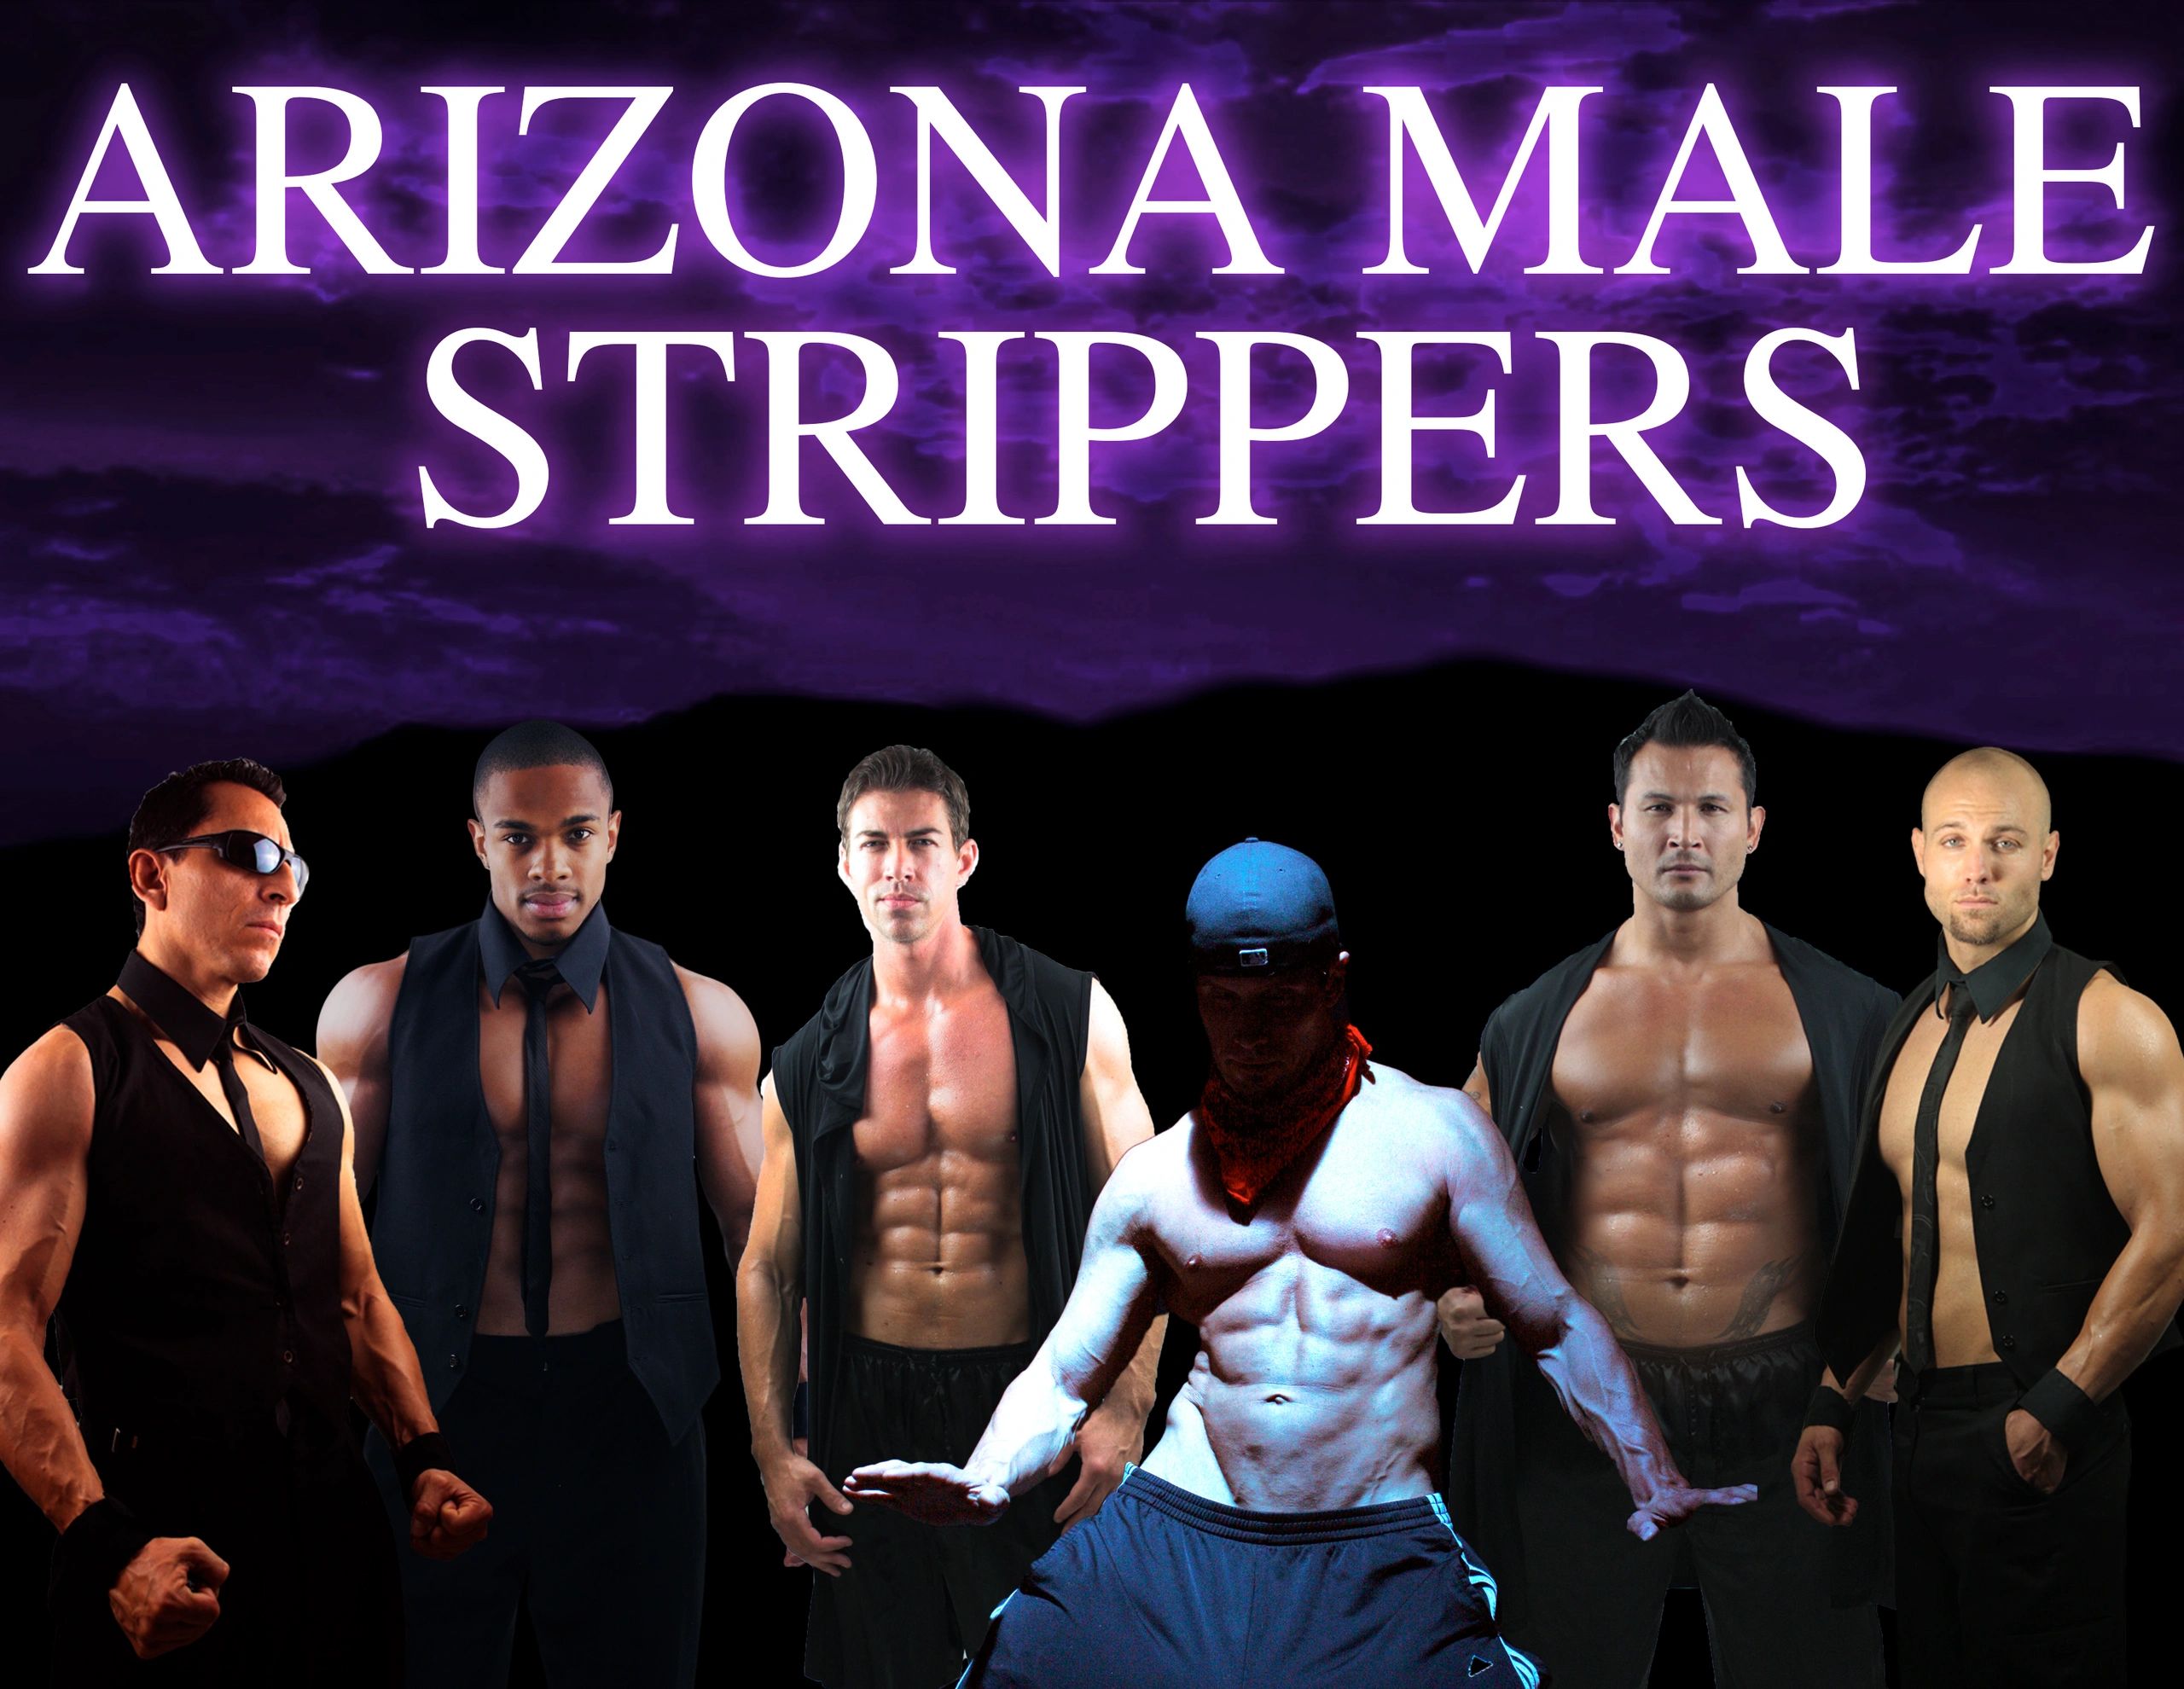 Arizona male strippers banner, 6 shirtless male strippers posed in front of mountain landscape